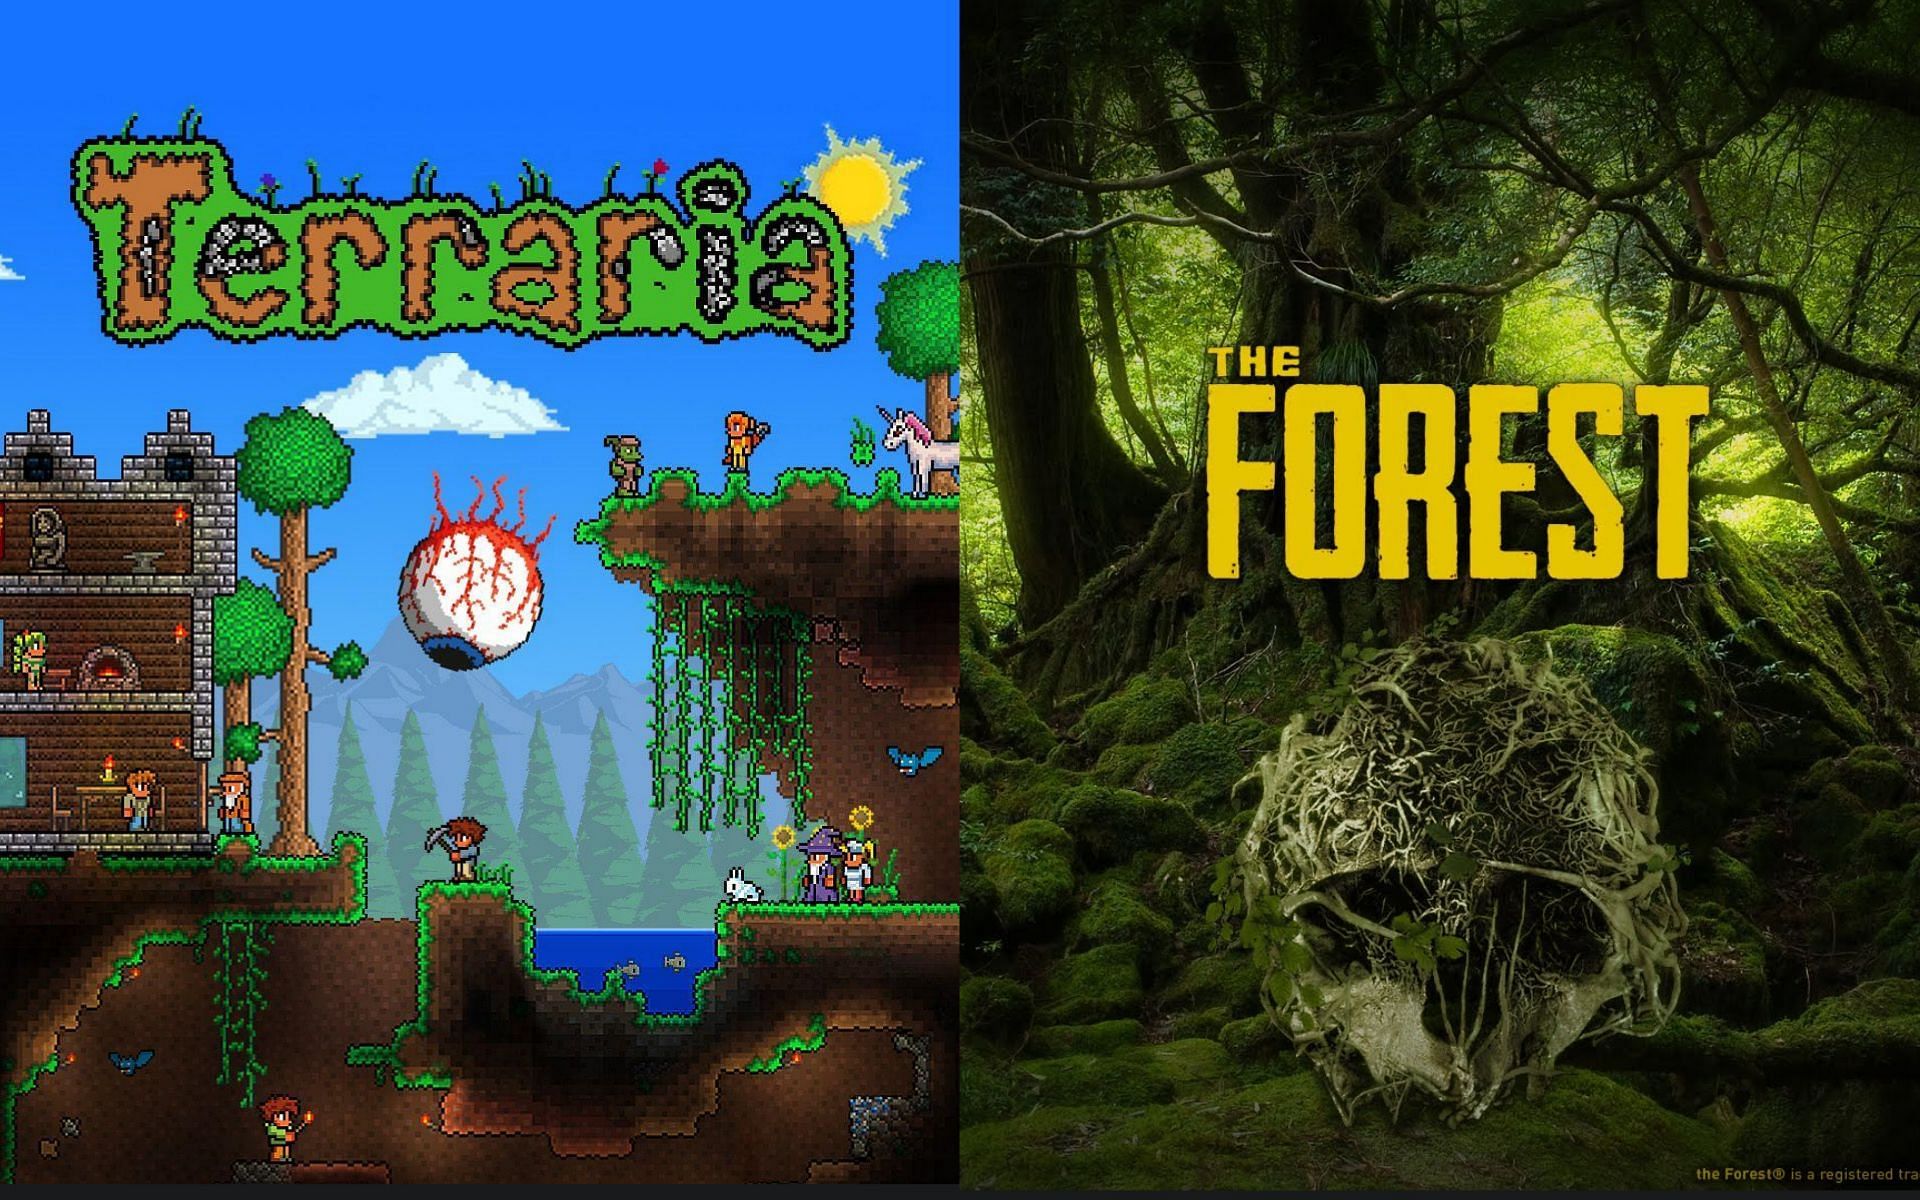 Terraria - Terraria is 50% off on Steam for the